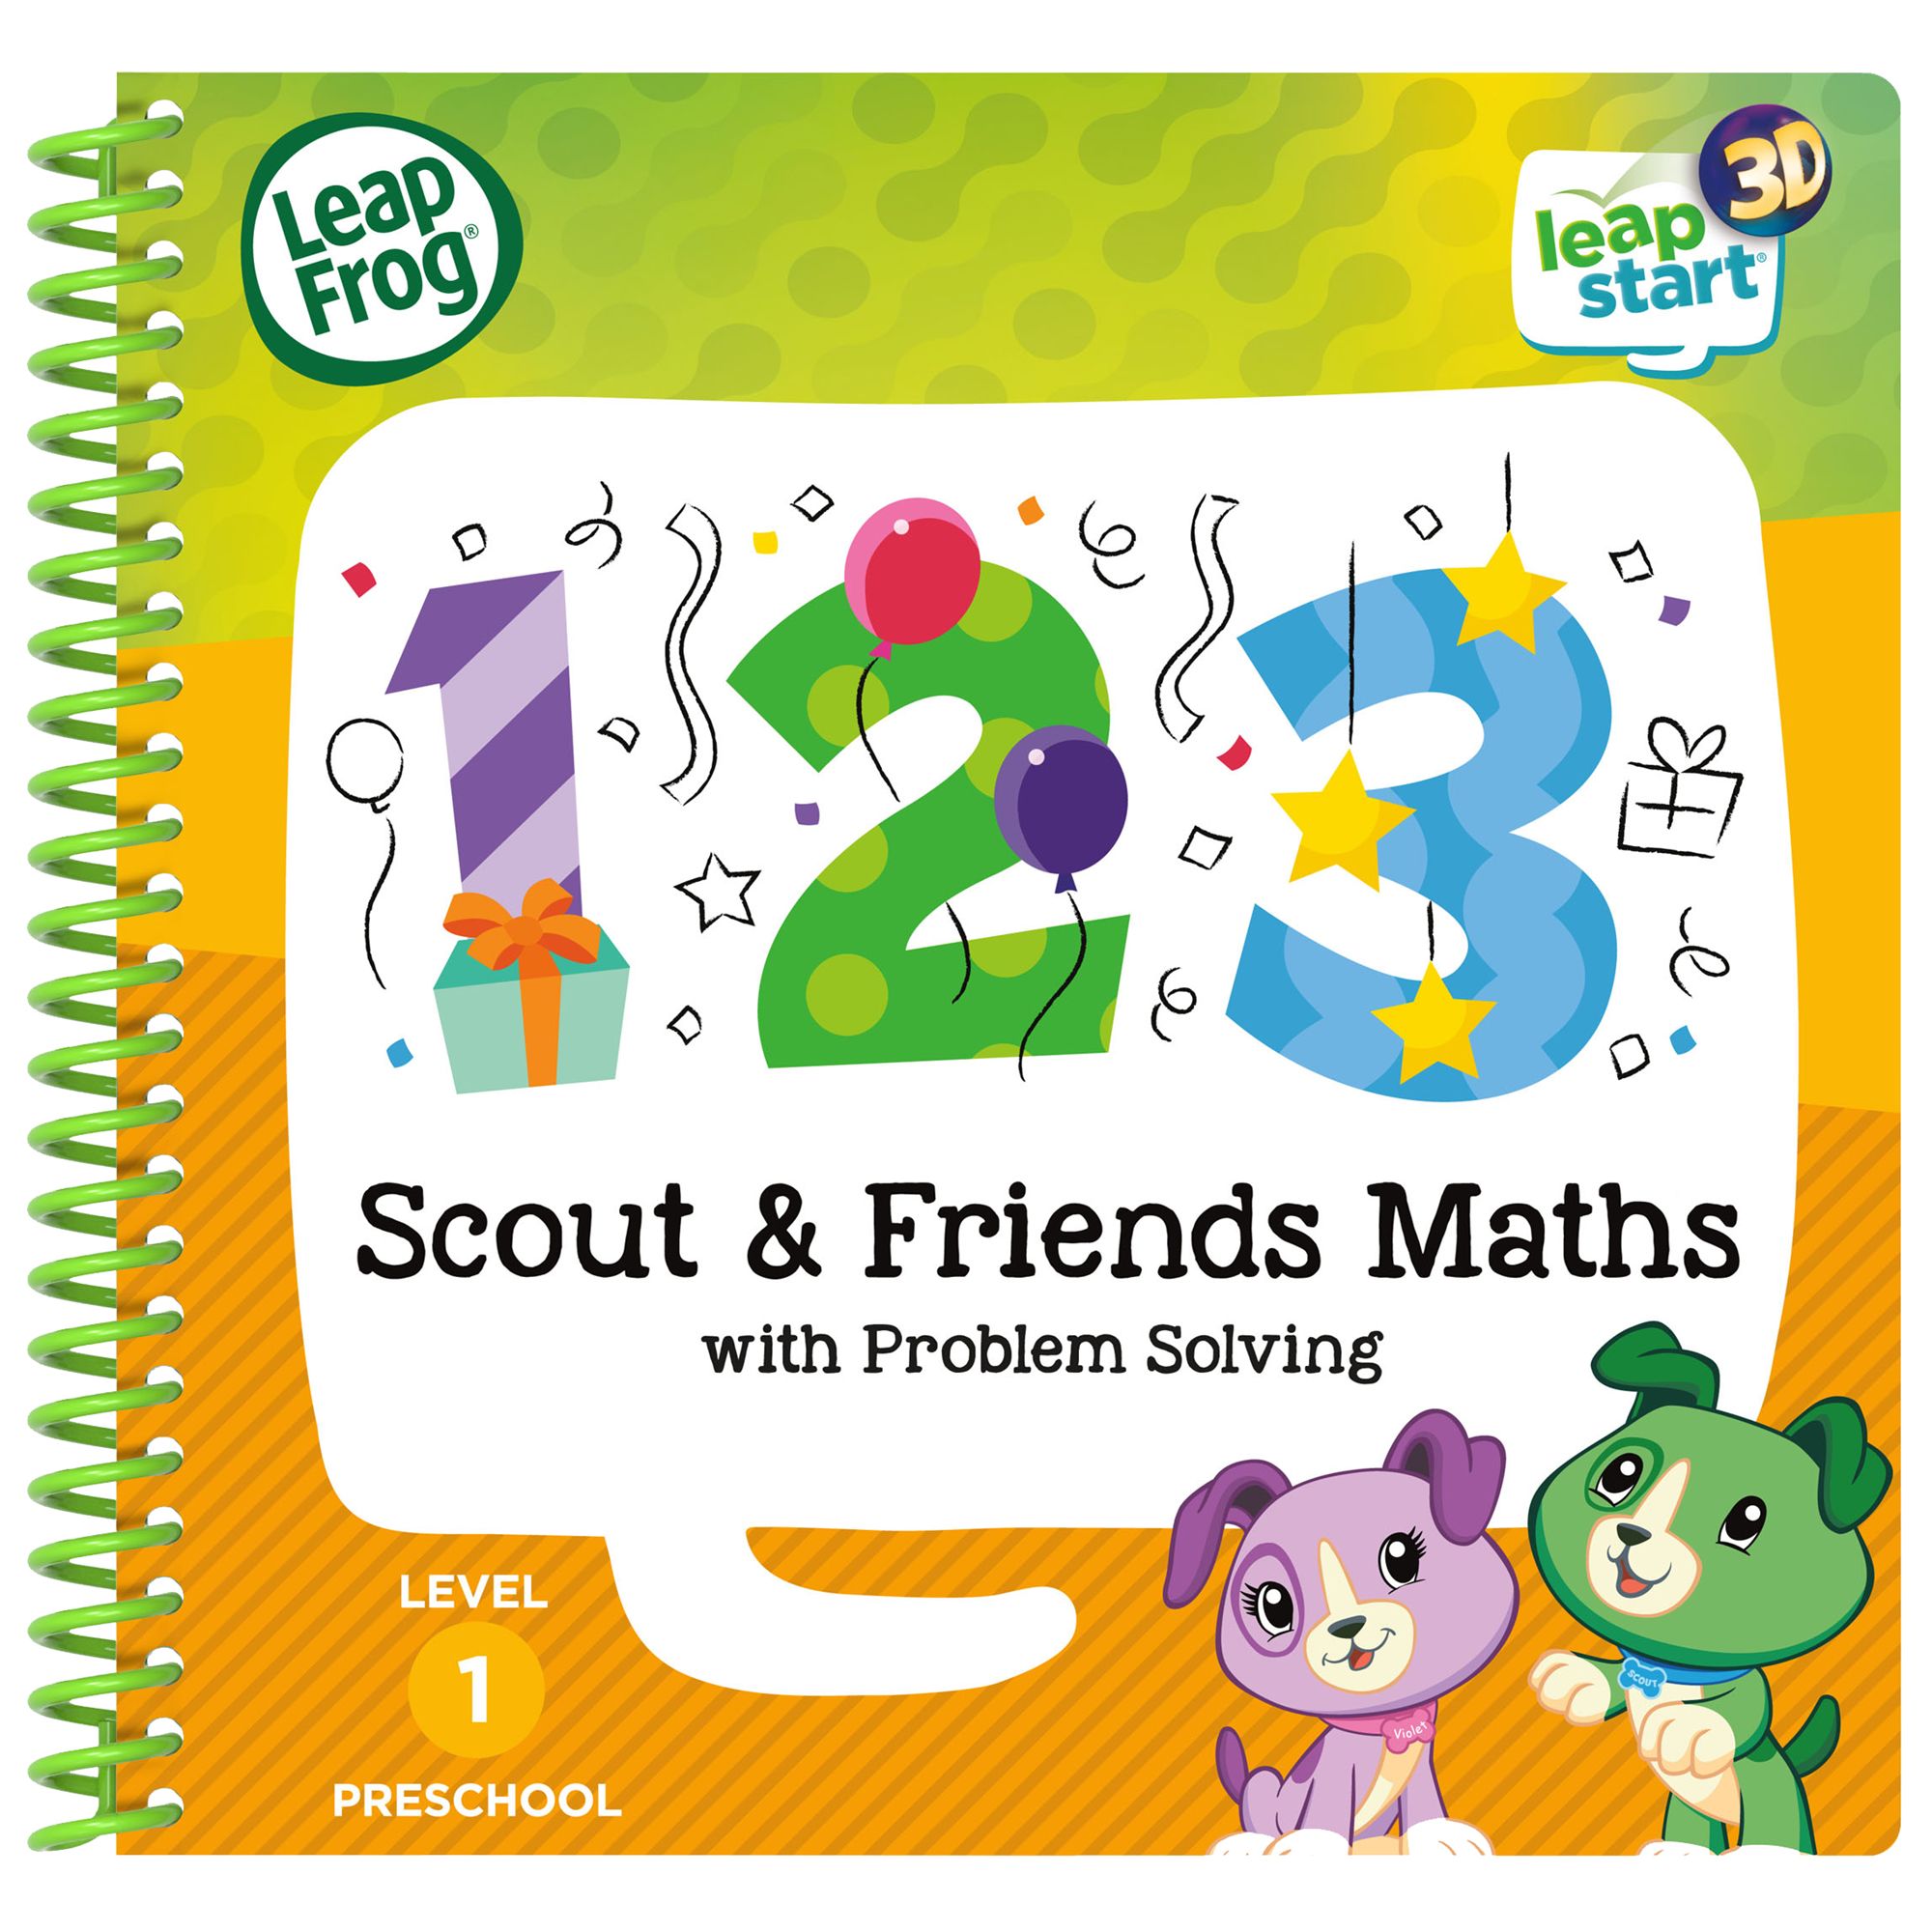 Leapfrog Leapstart 3d Scout And Friends Maths And Problem Solving